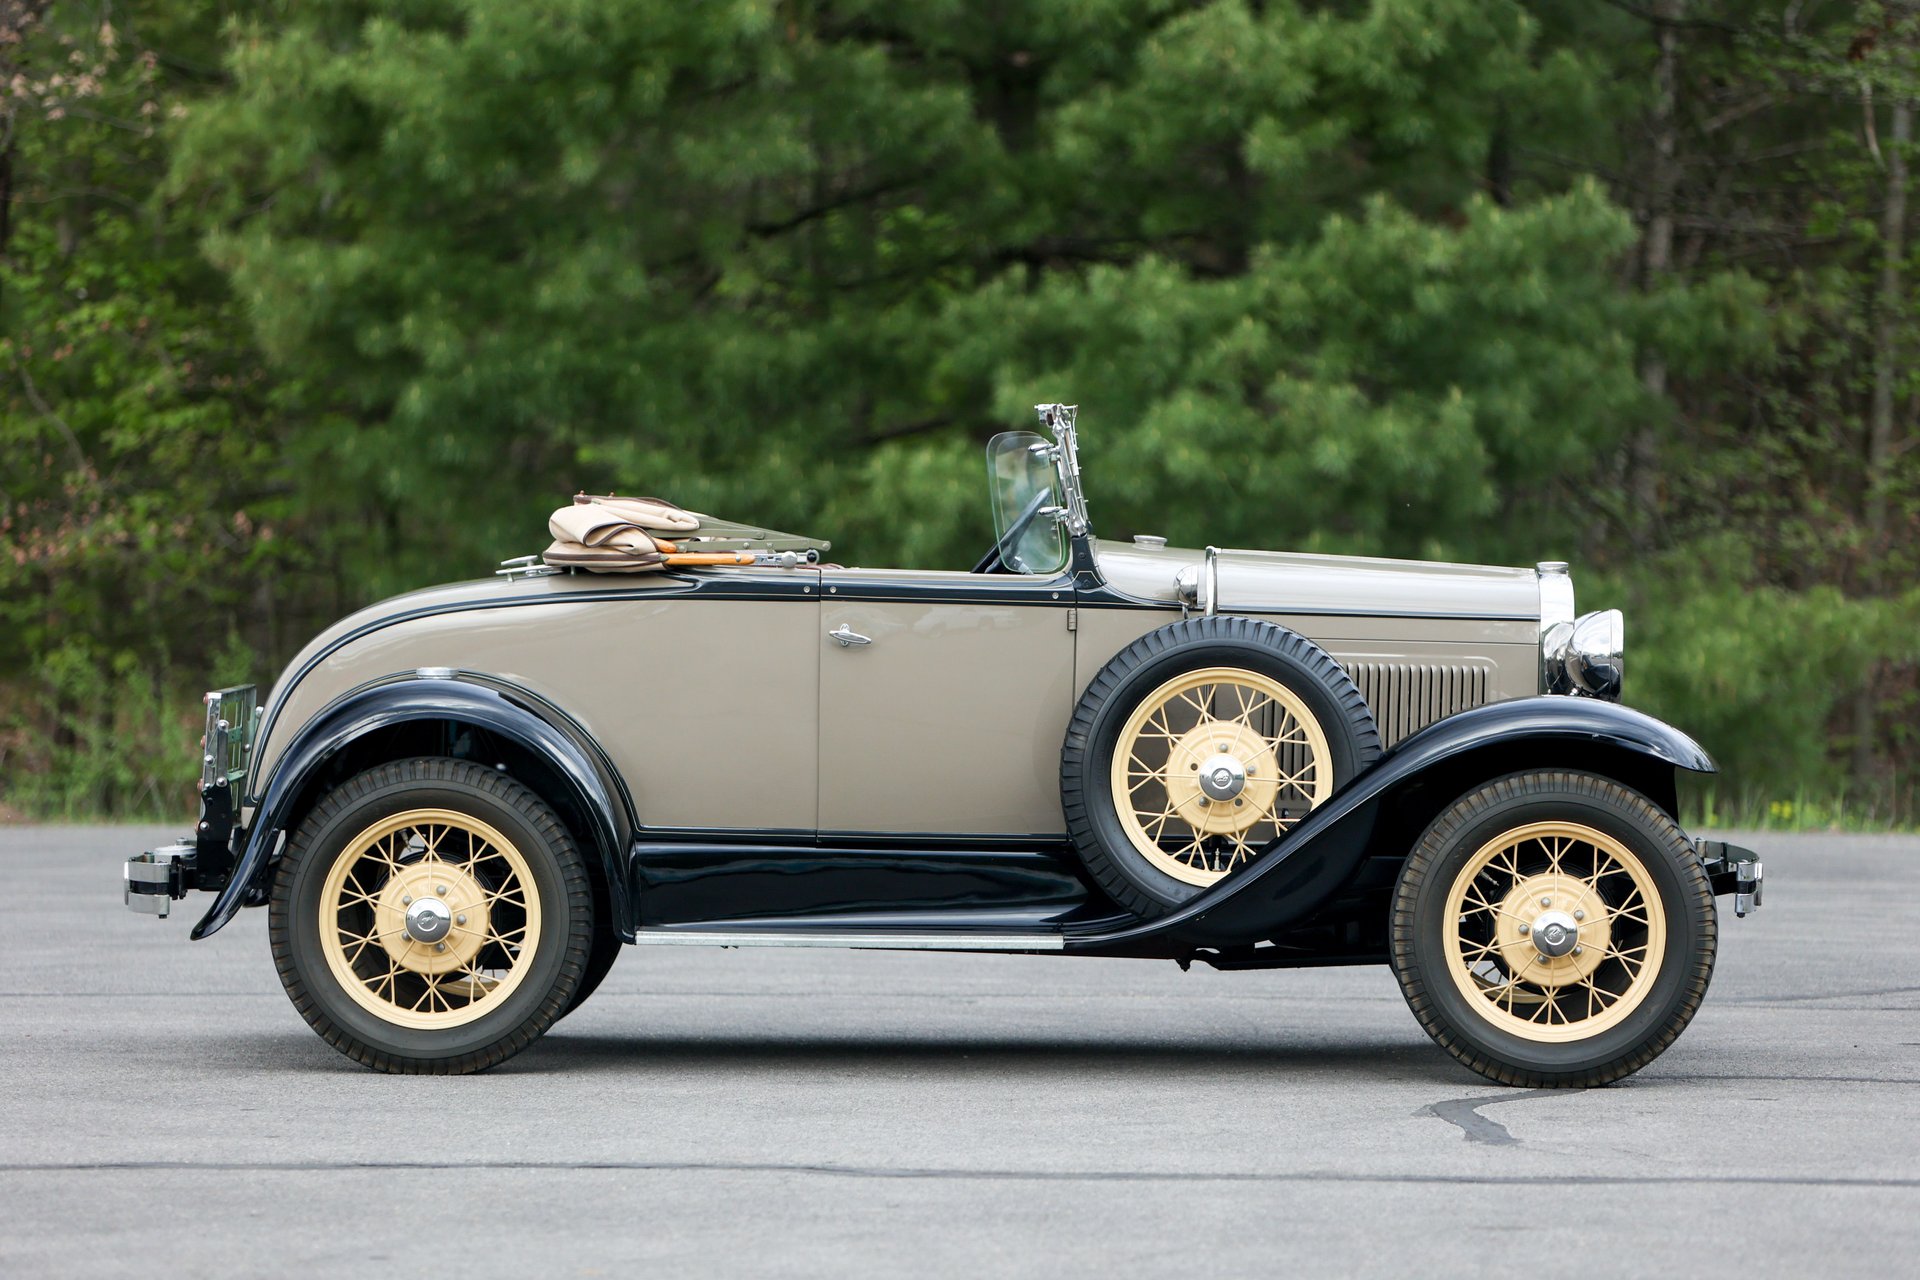 1931 ford model a deluxe roadster